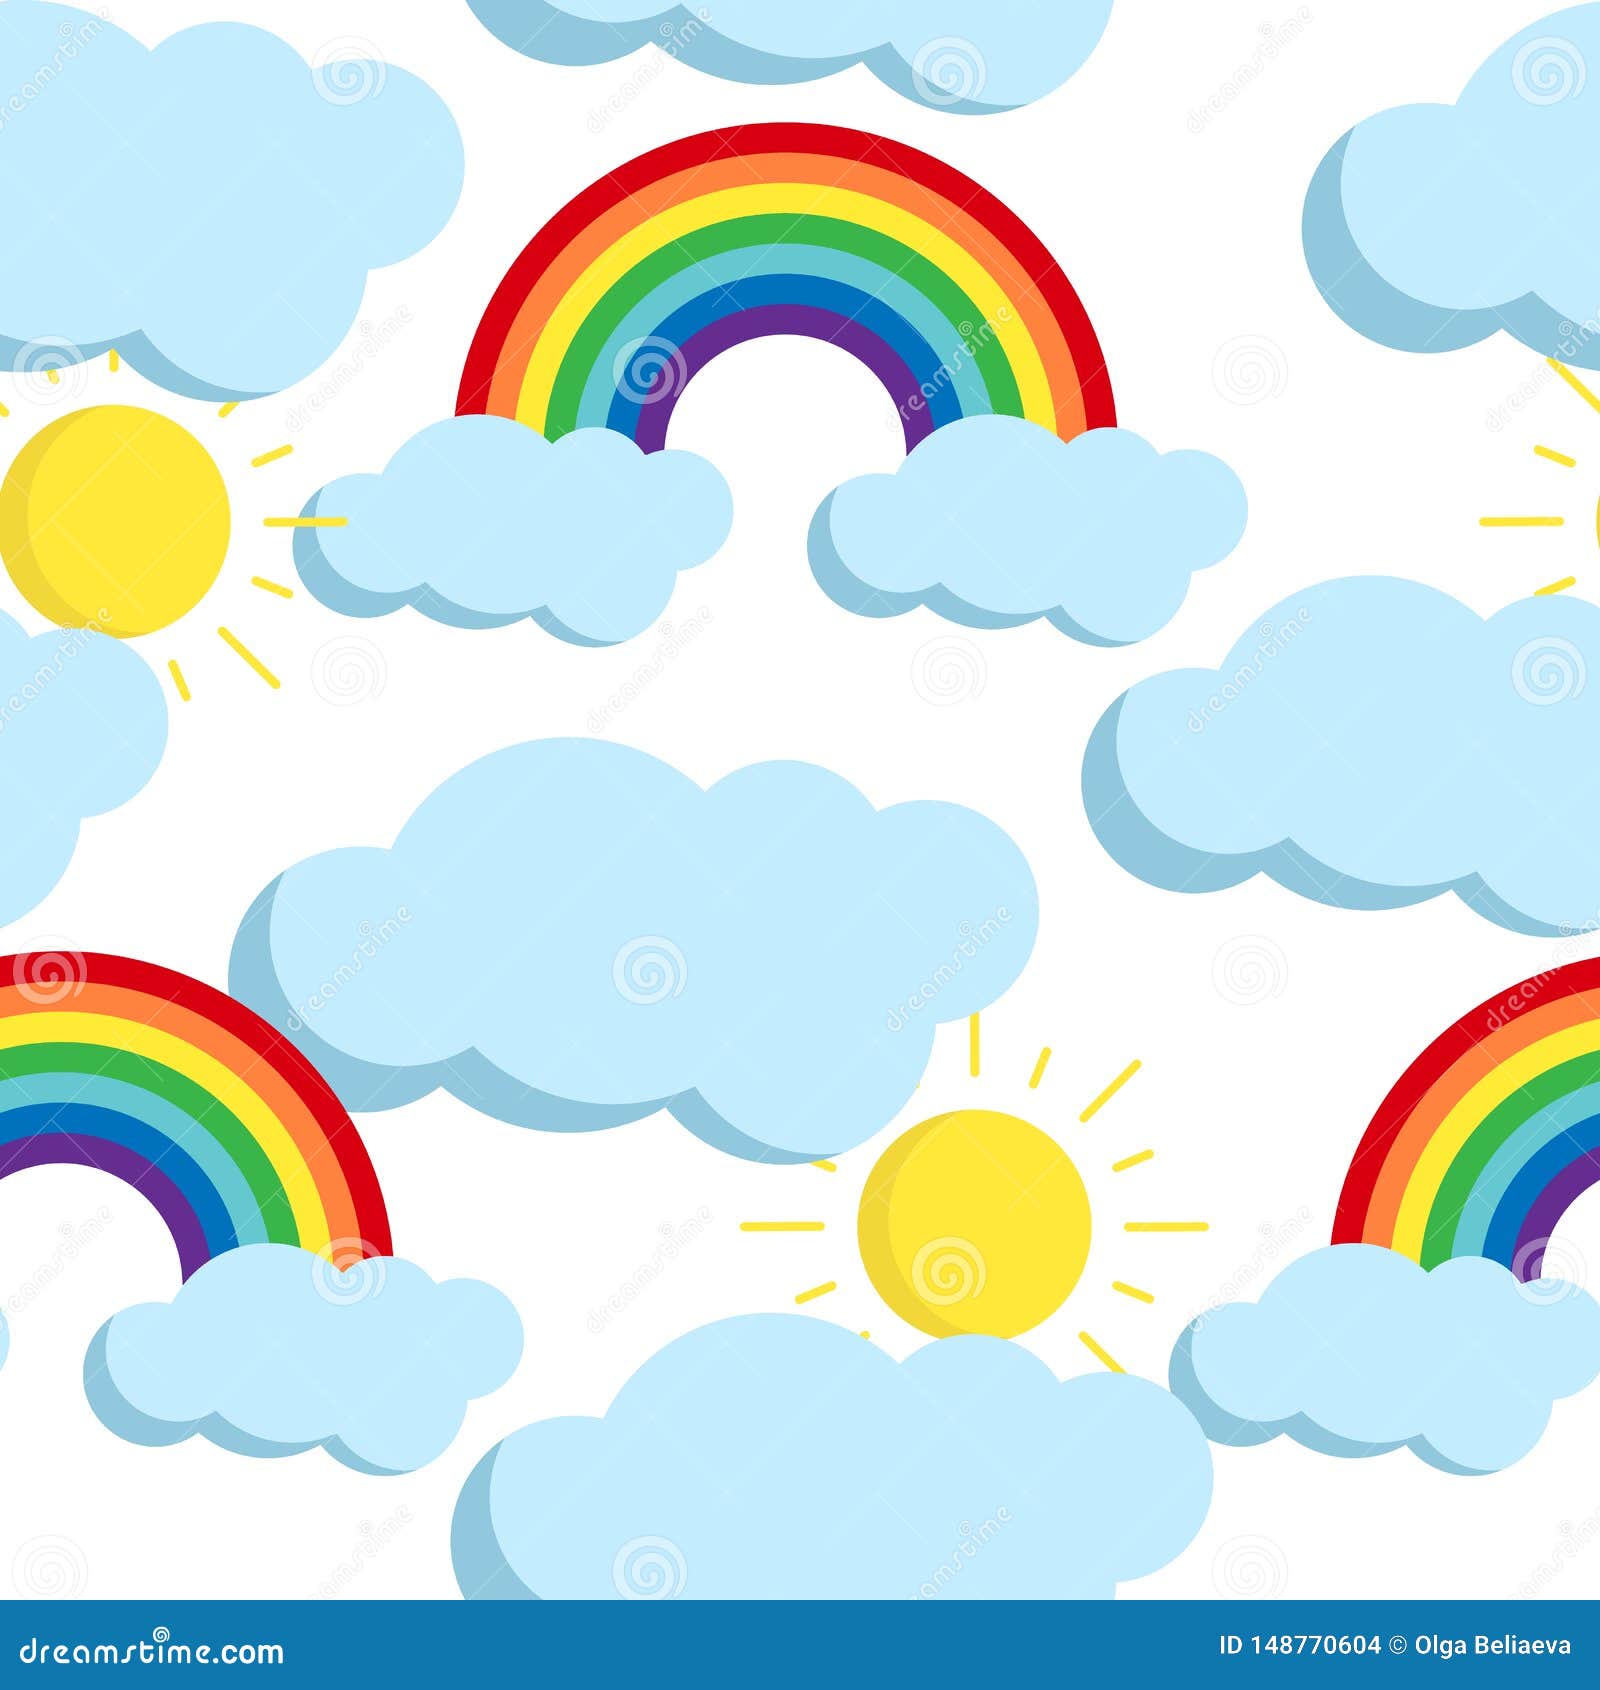 cute  seamless pattern with rainbows and clouds icons.